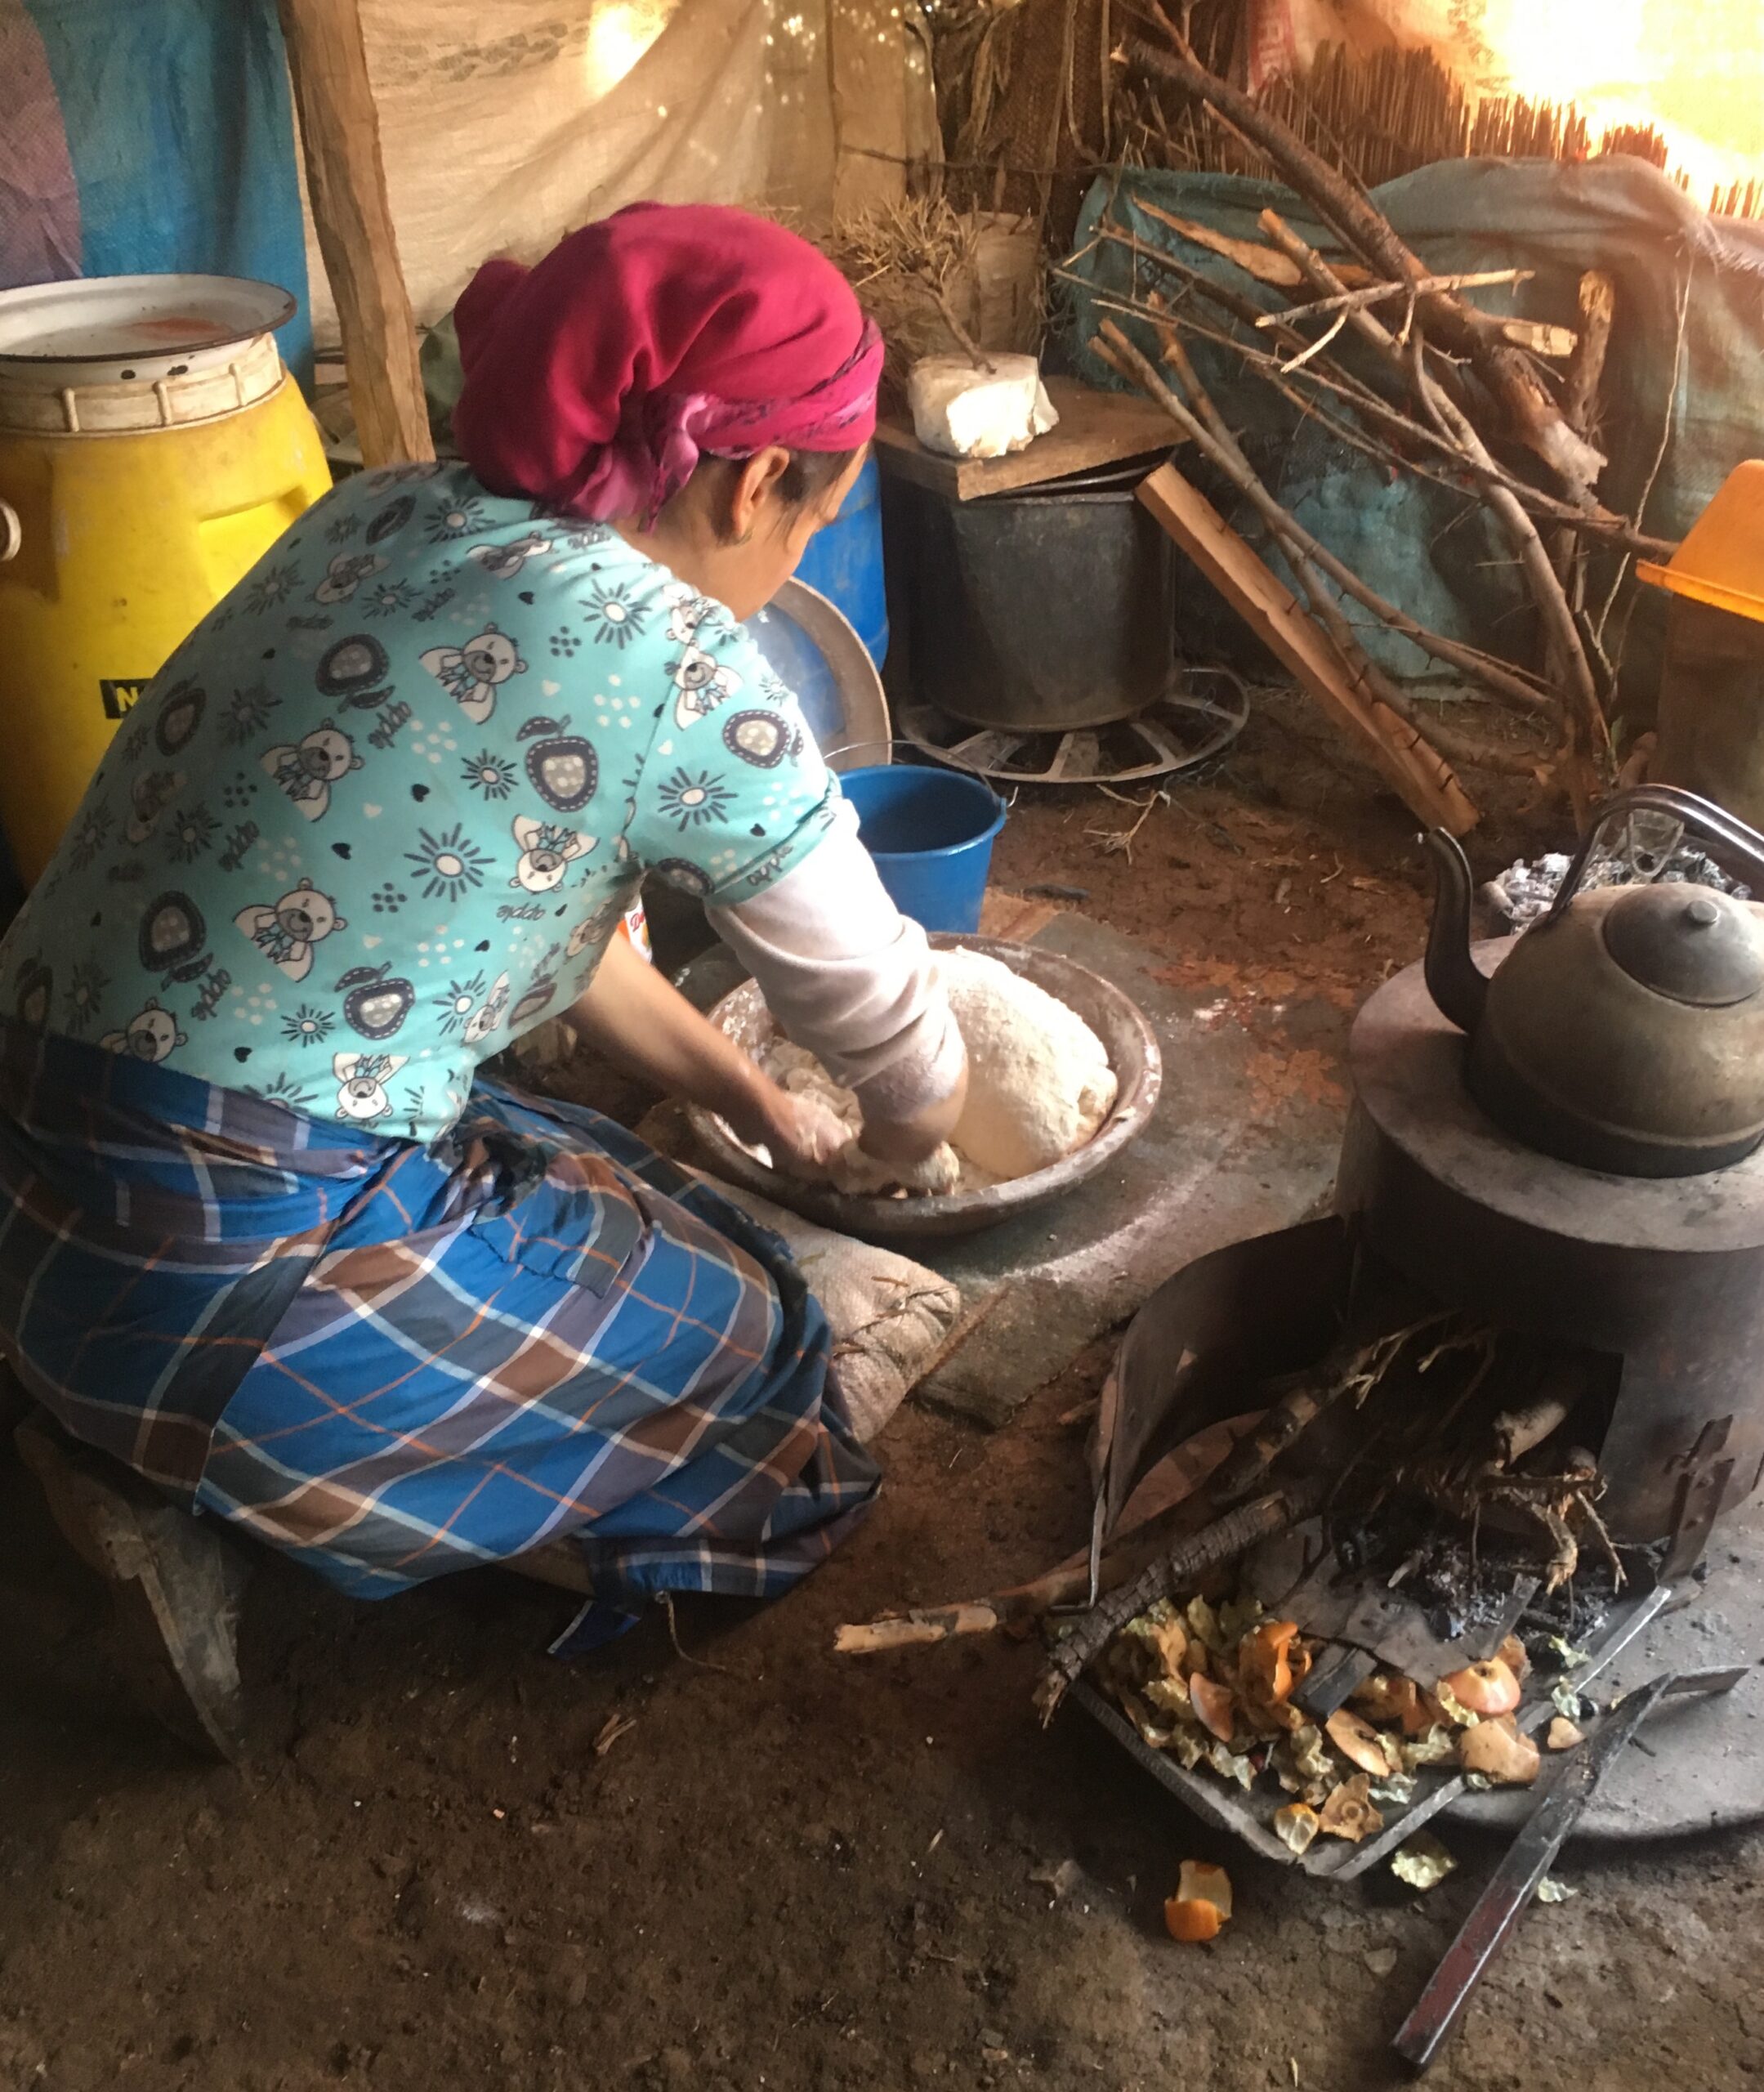 Image of Fatima, crouched down preparing bread with her traditional oven in a basic kitchen